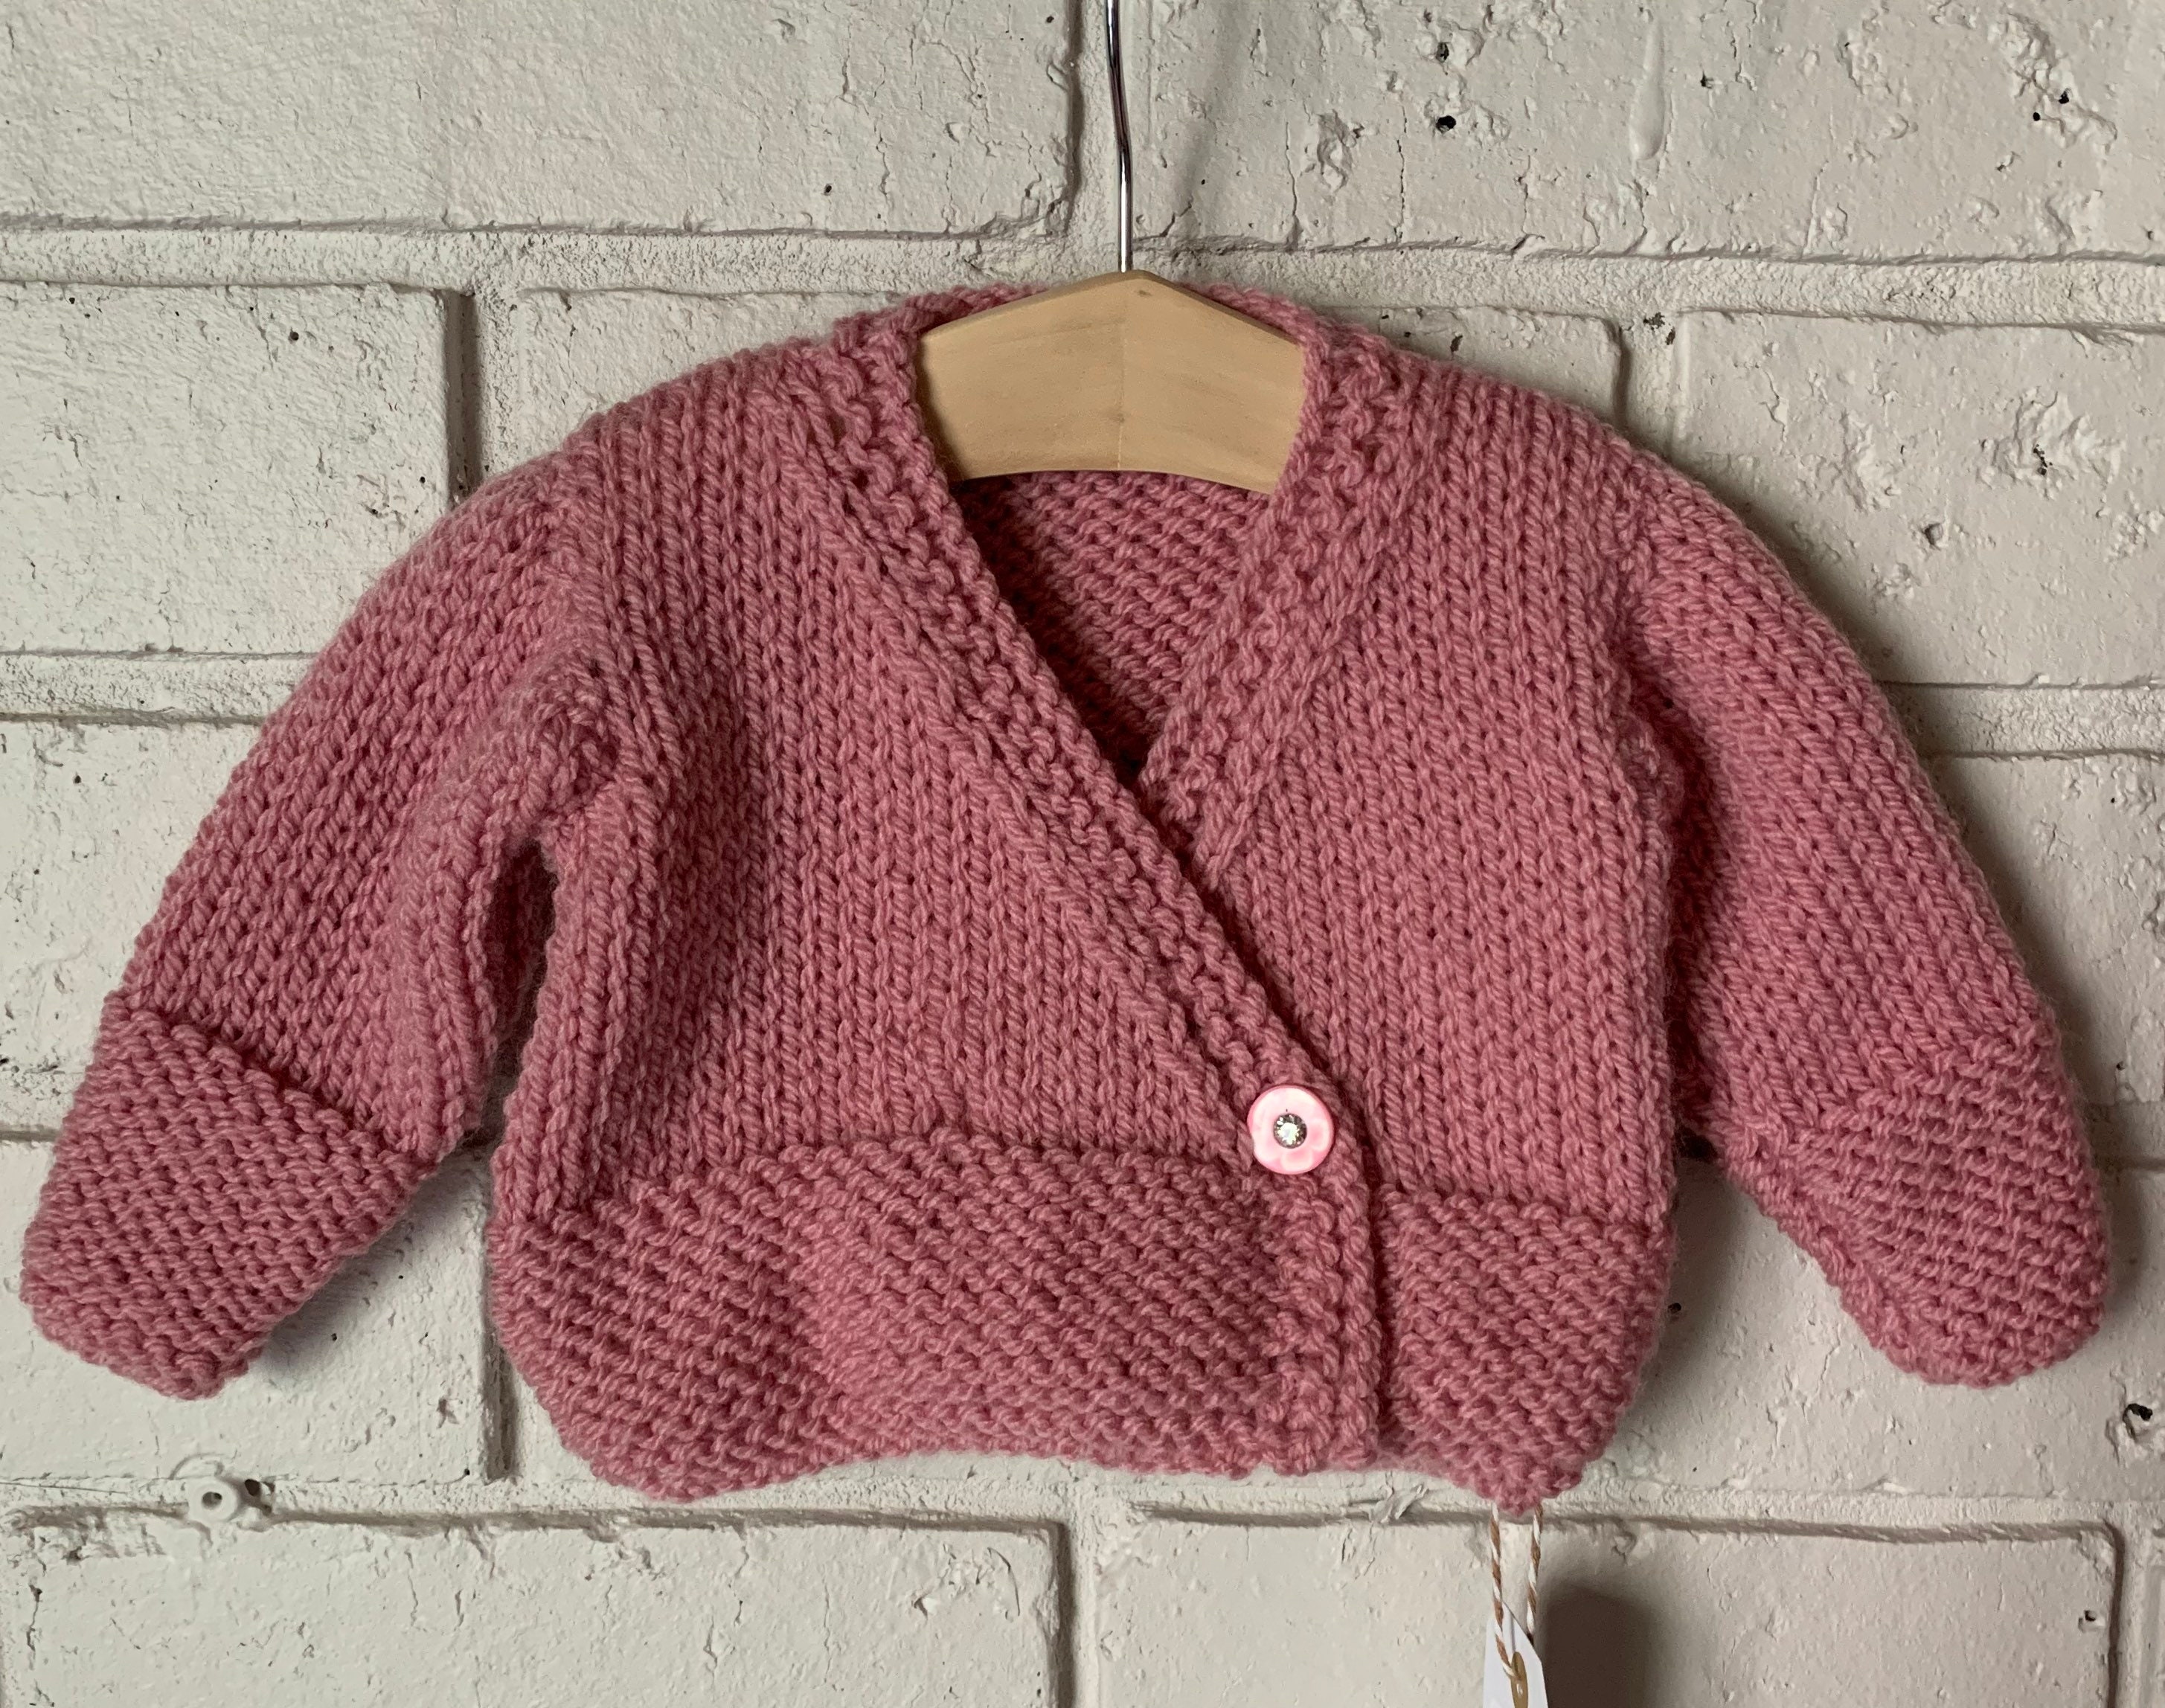 Knitted baby cardigan knitted wrap jacket size 3-6 months | Etsy